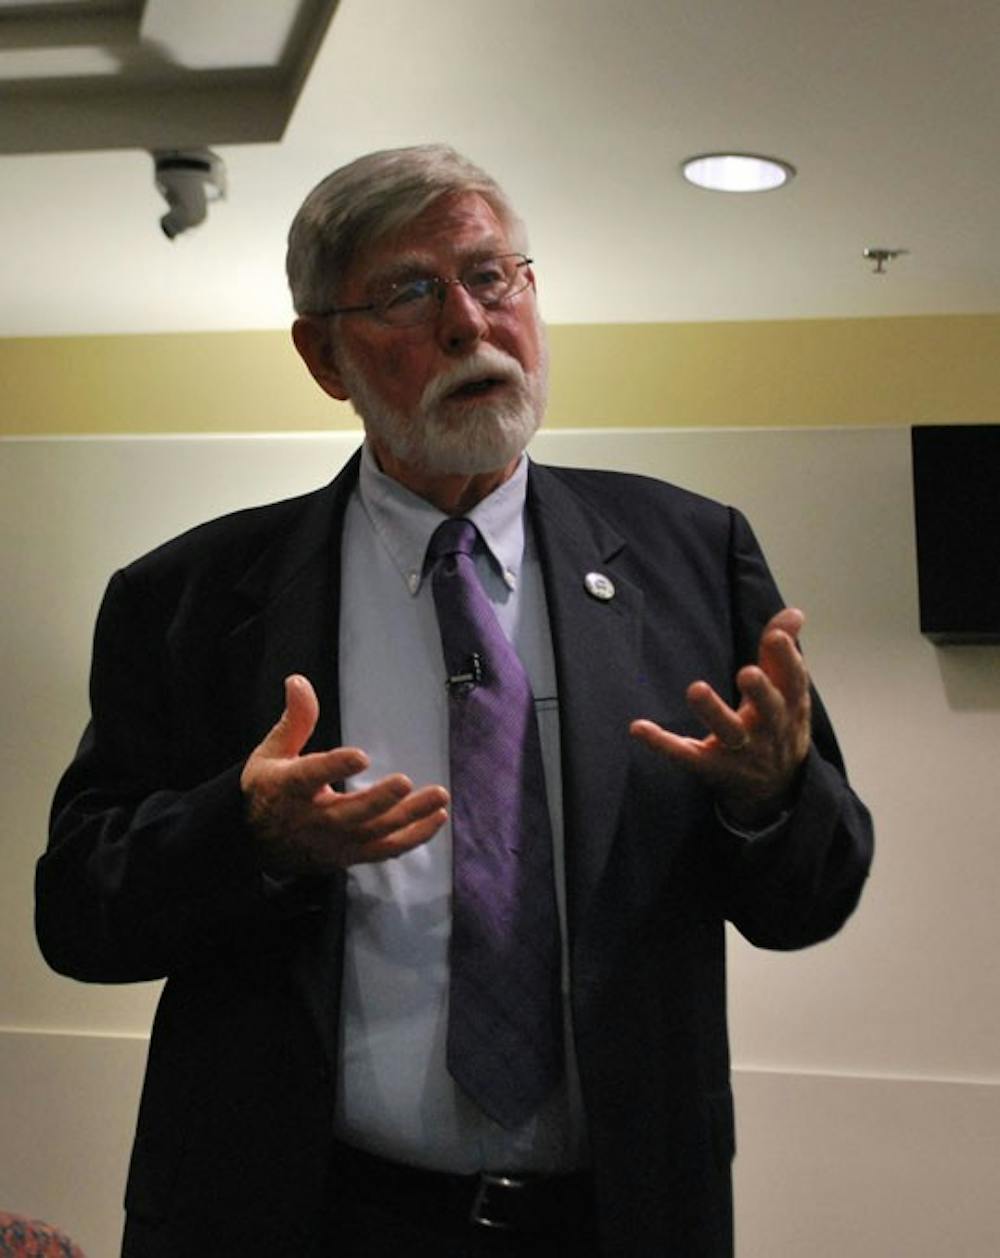 CONTAMINATION â€” Dr. Bill Hirzy, chair of AUâ€™s Chemistry Department, worked for the EPA from 1981 to 2008. He says that despite pleas from department employees, the department still refuses to undertake a risk assessment of flouride in drinking water. 